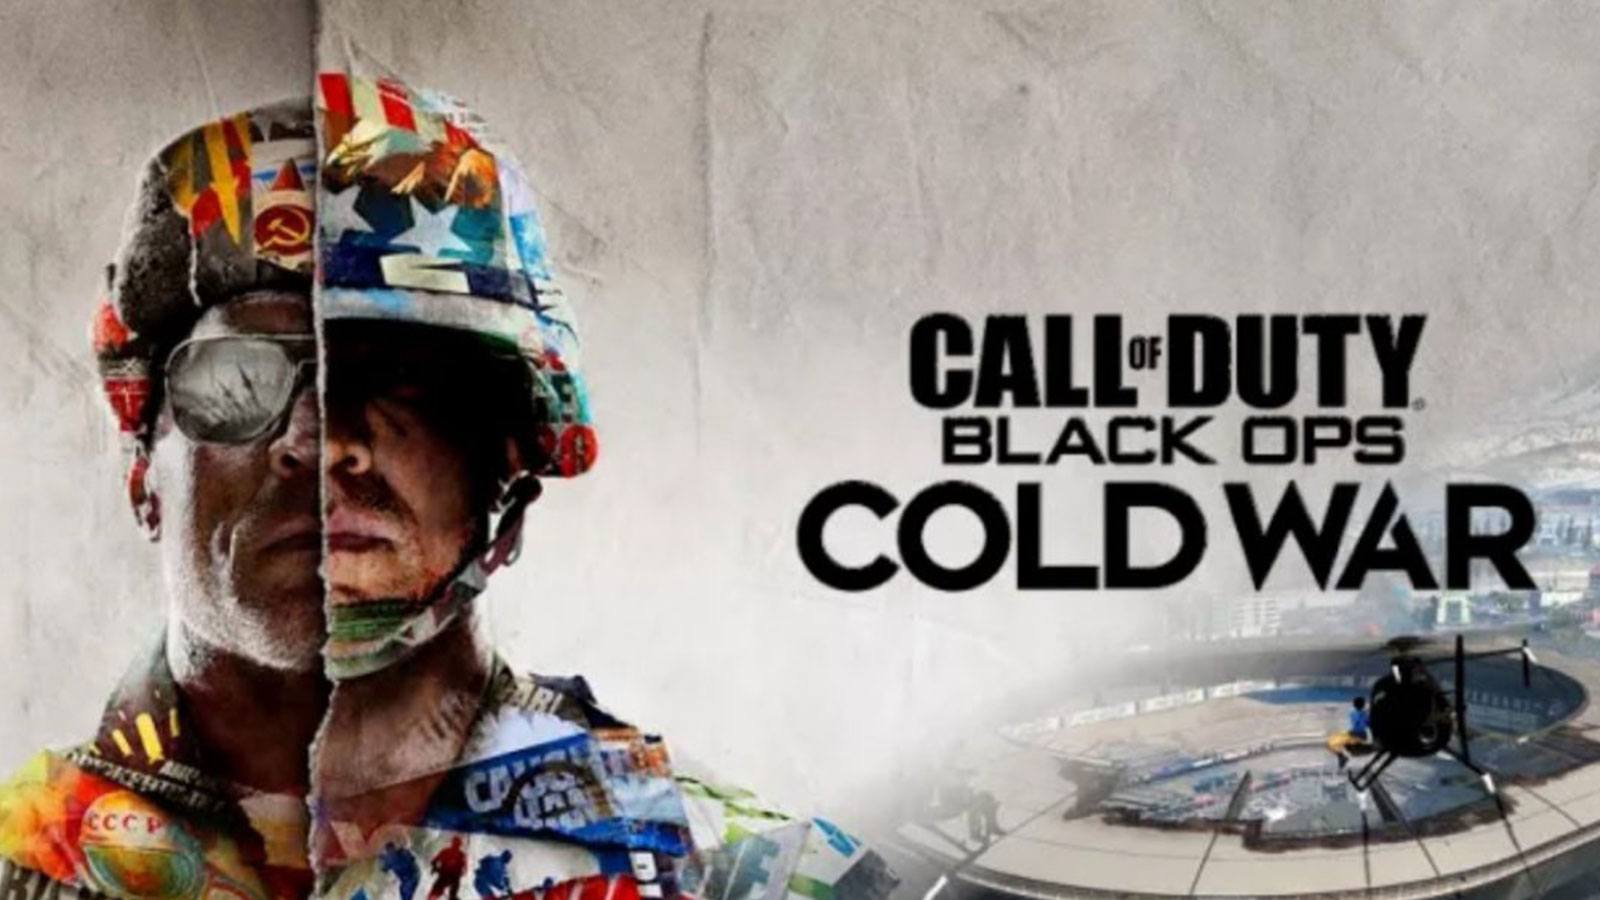 Black Ops Cold War couverture Treyarch Activision